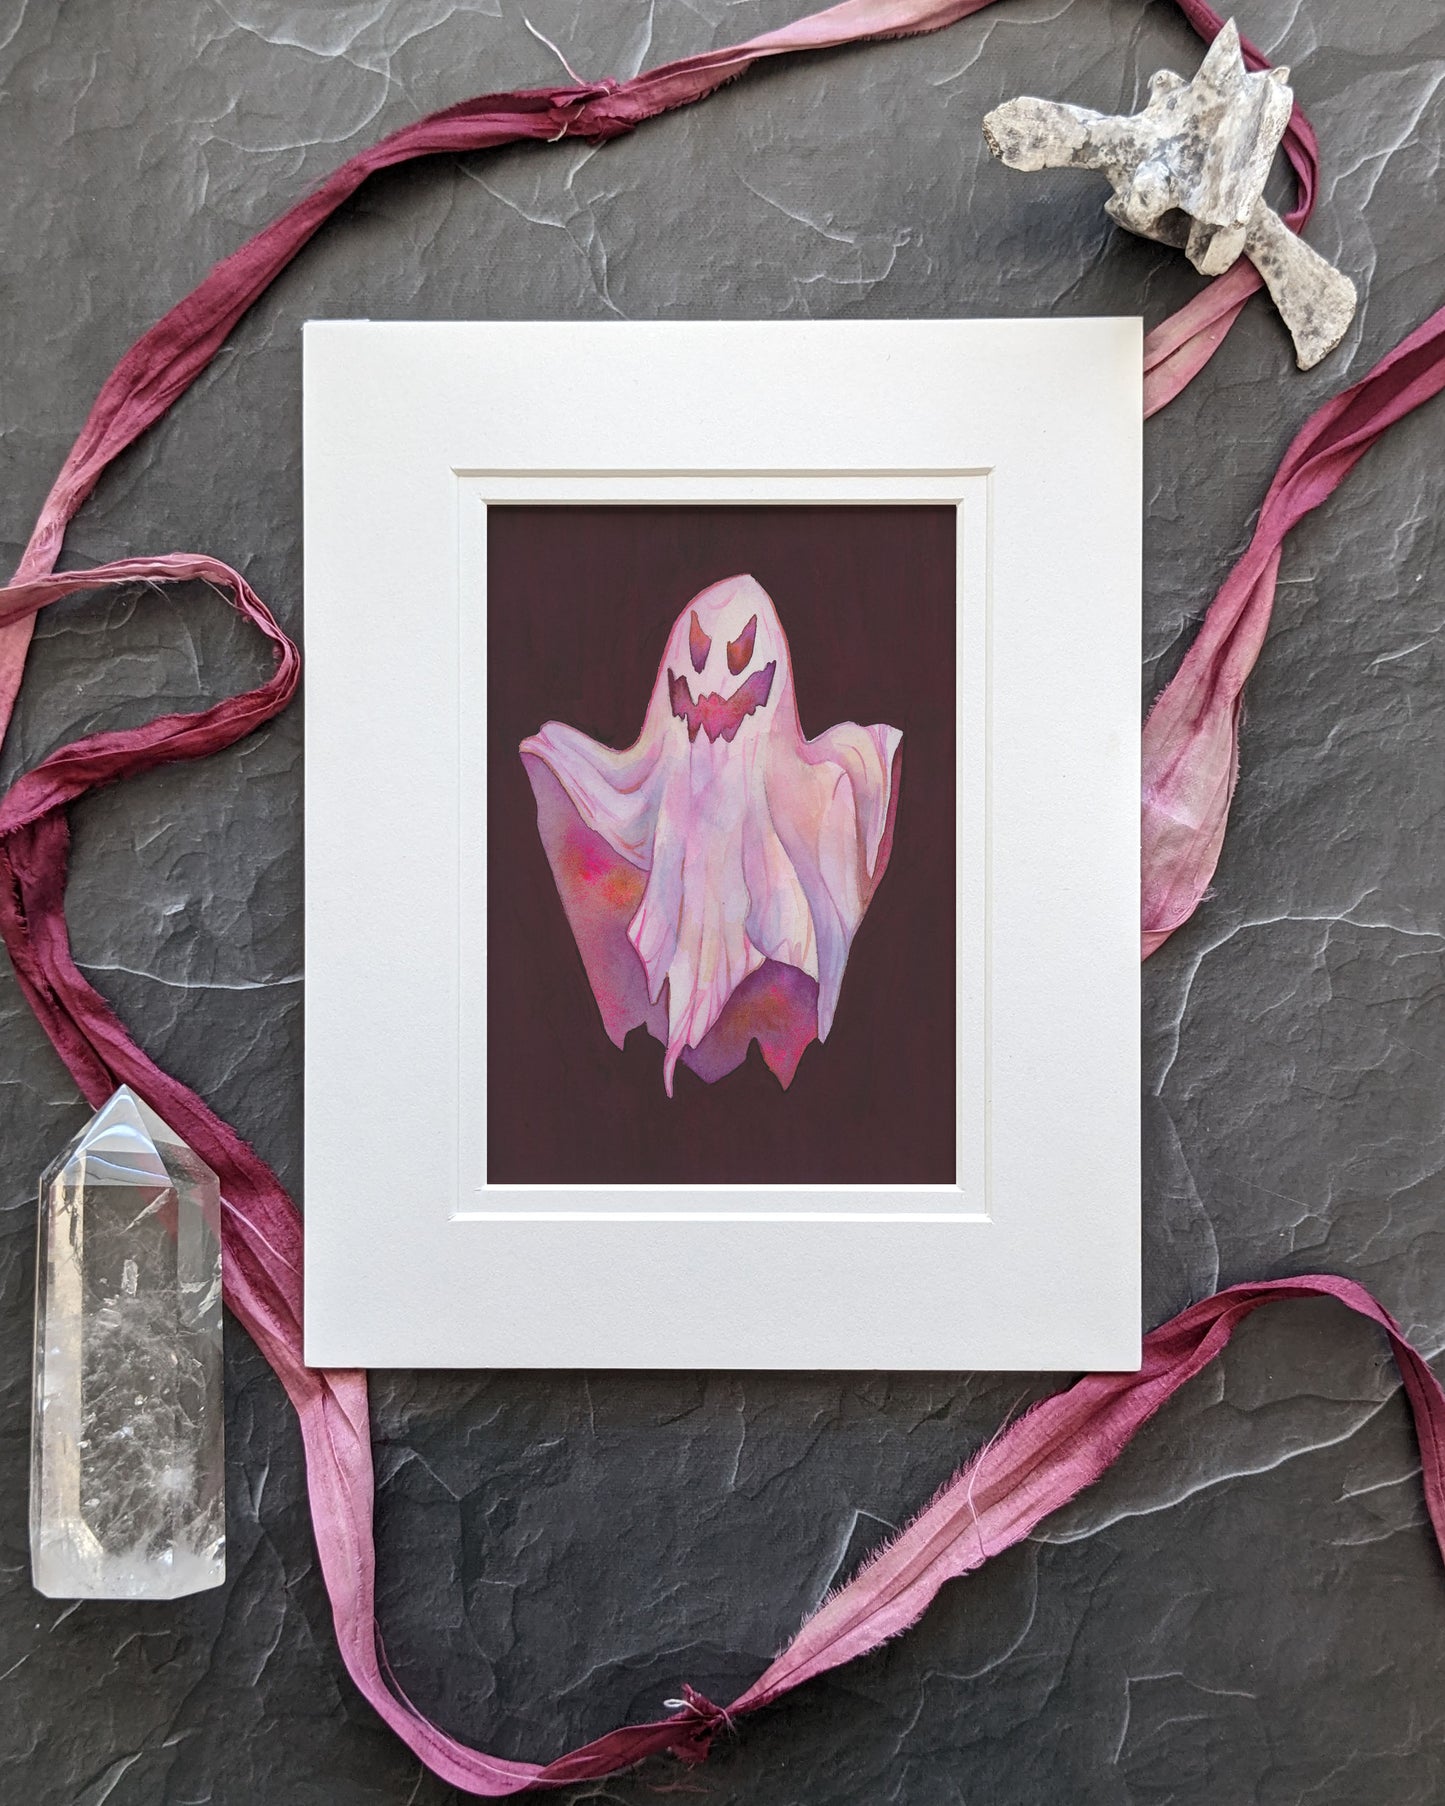 Minerva –5x7 Original Watercolor and Gouache Ghost Painting